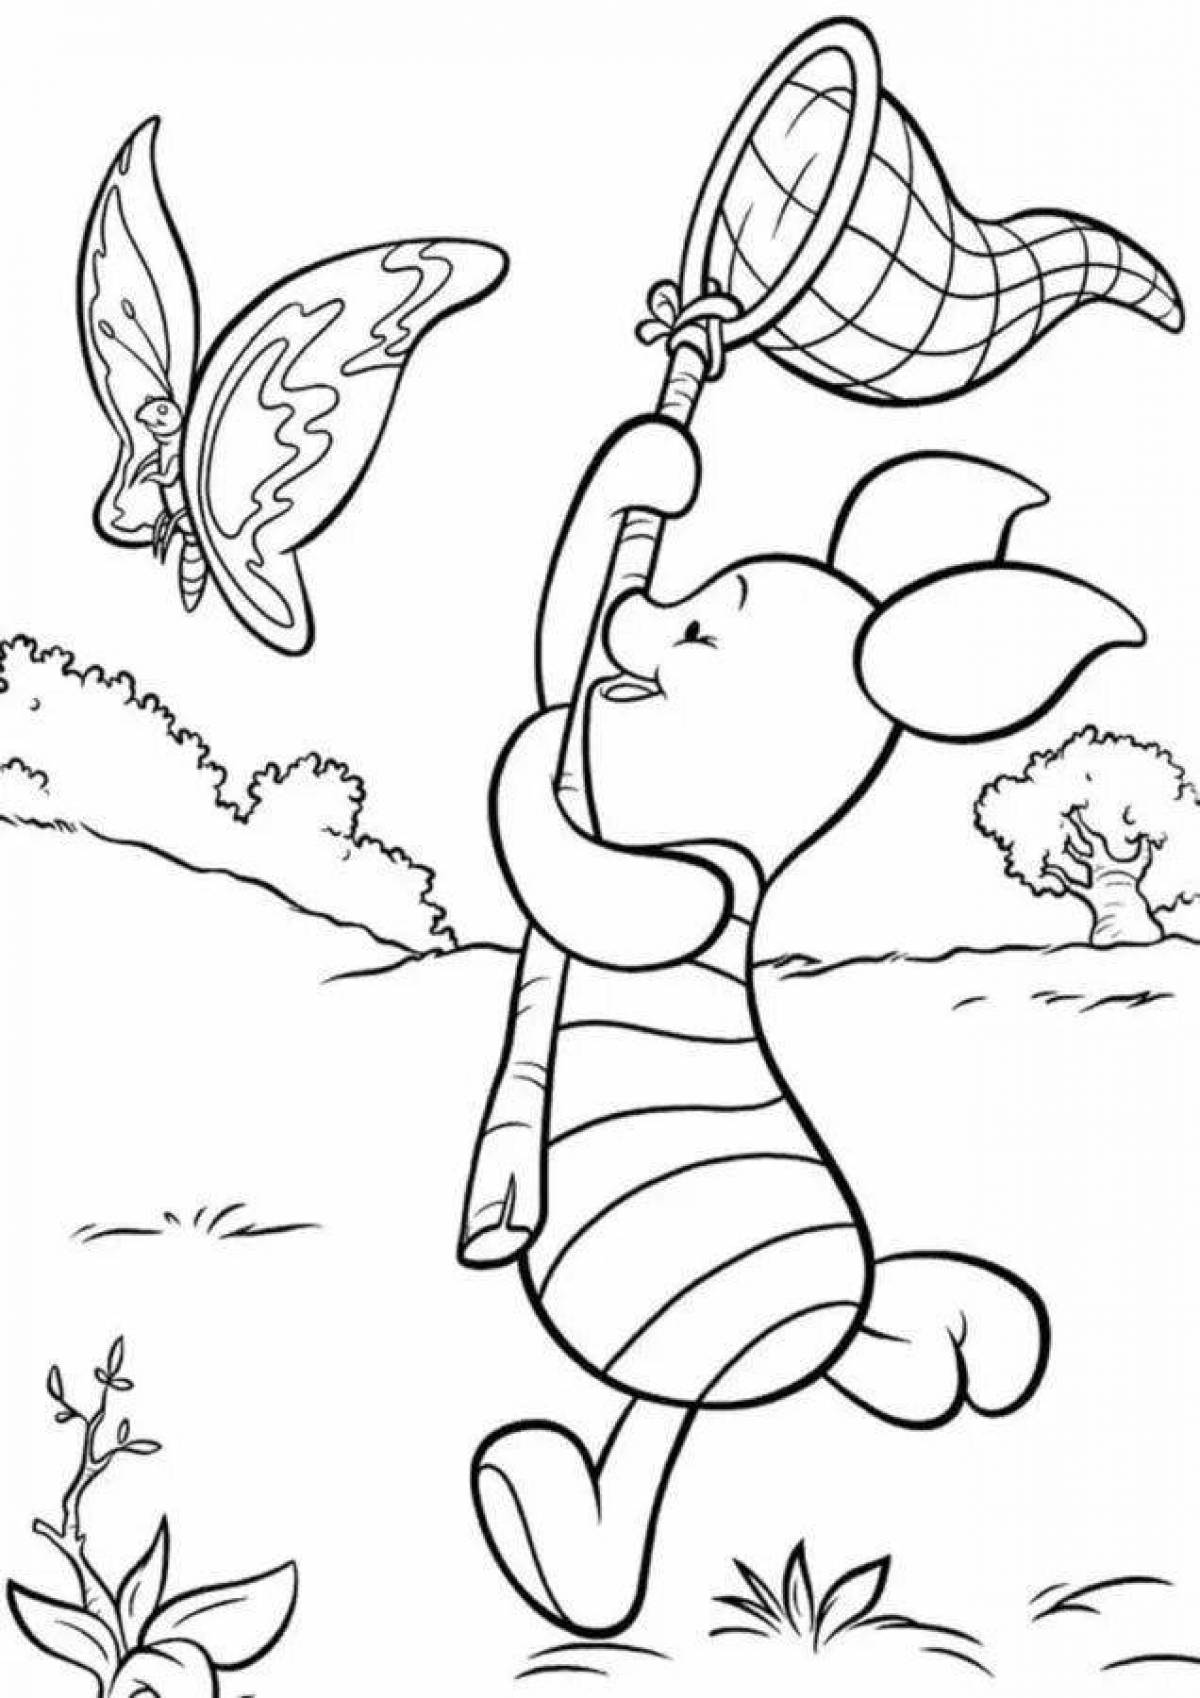 Winnie the pooh for kids #6